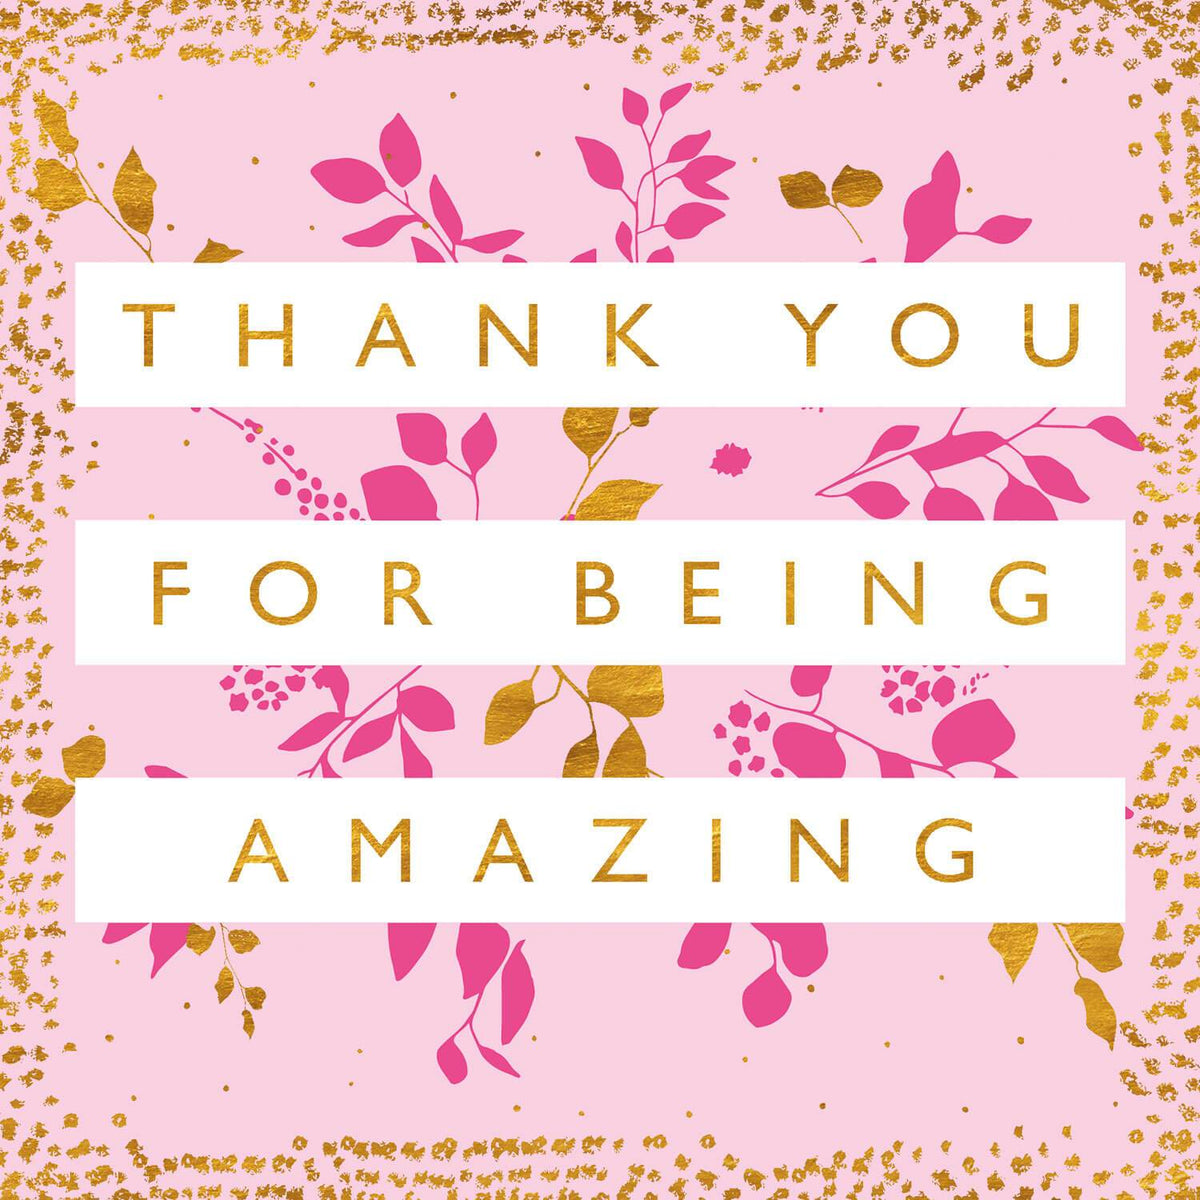 Thank You For Being So Amazing Card Thank You Cards Greeting Cards